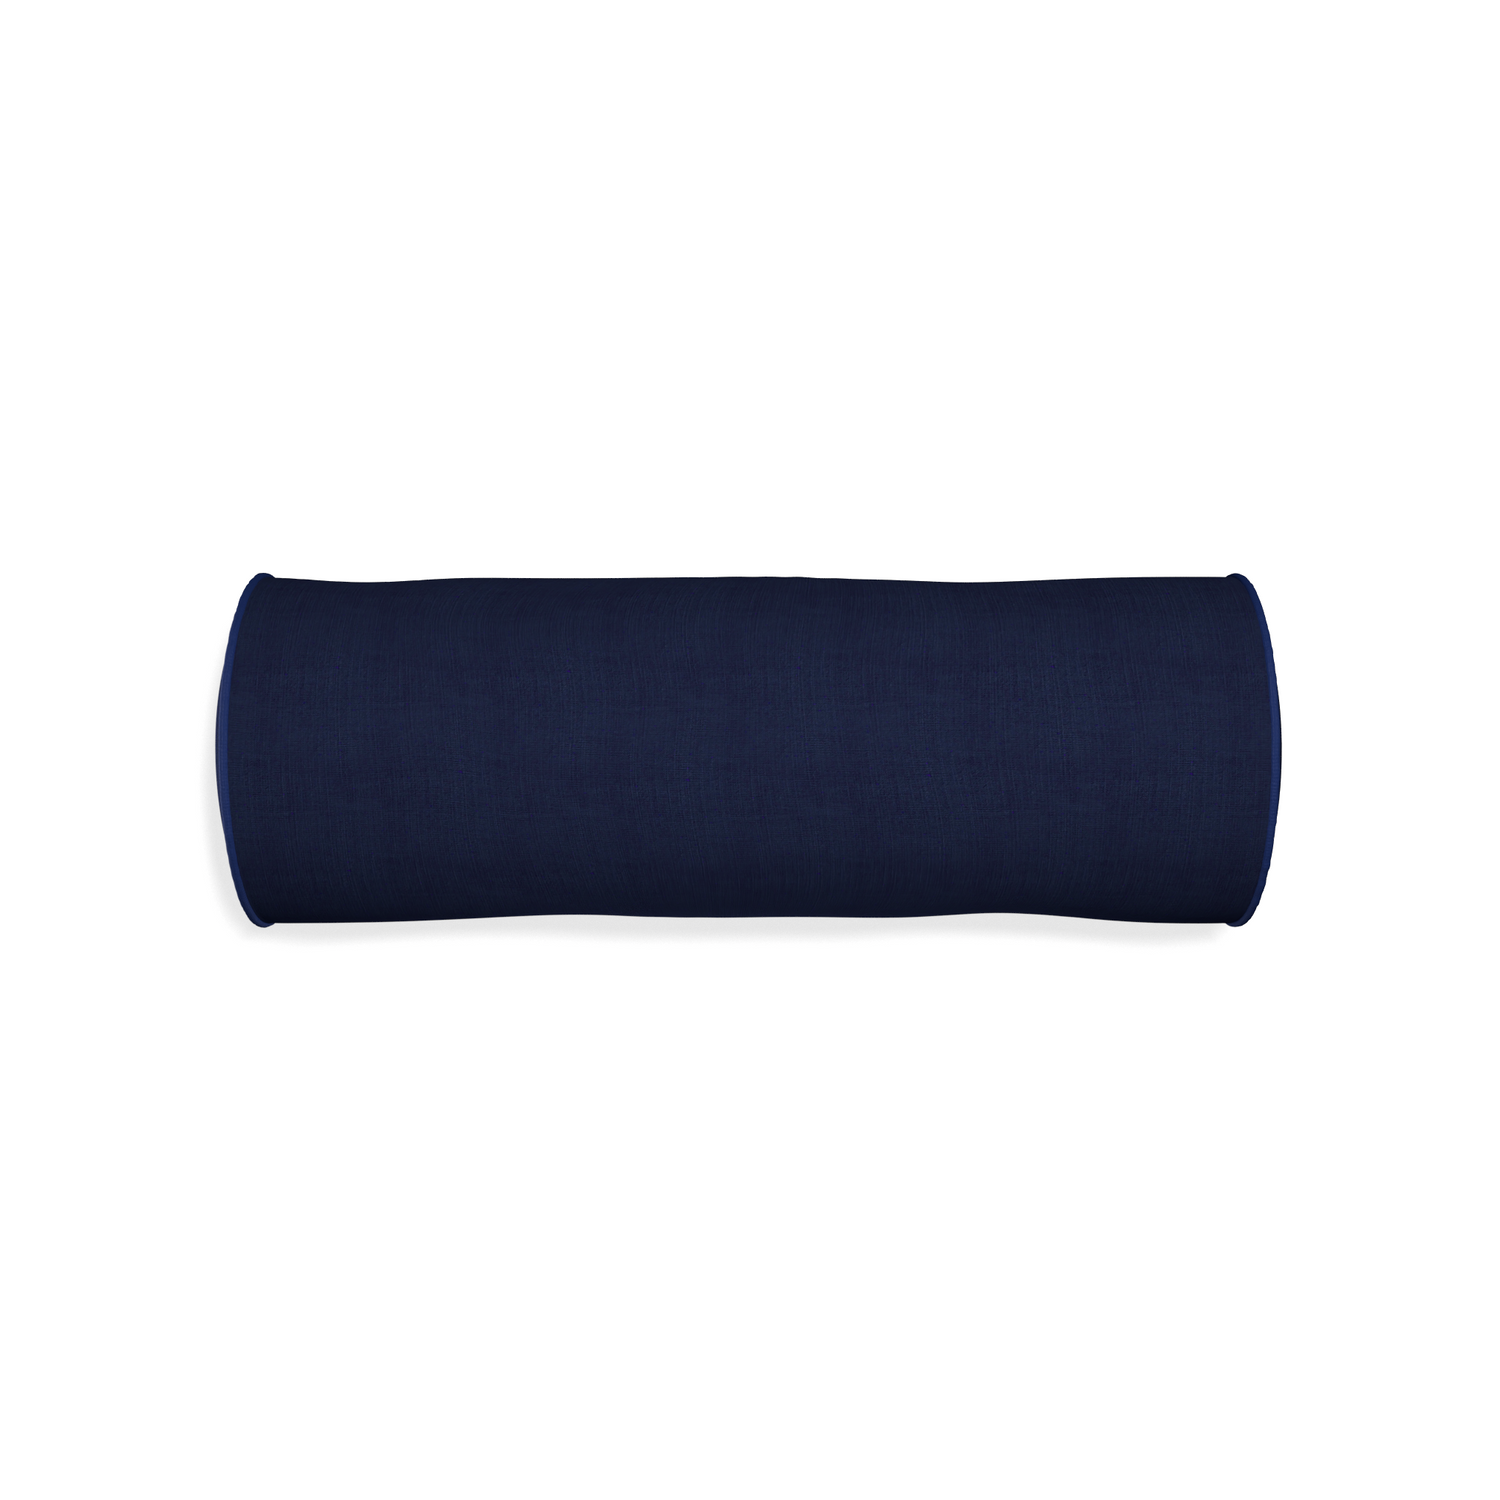 Bolster midnight custom navy bluepillow with midnight piping on white background